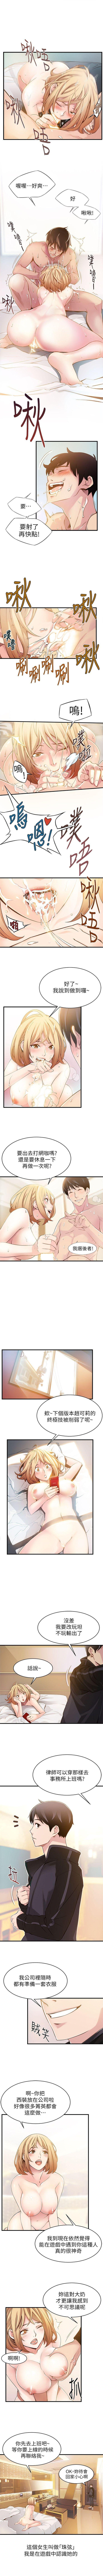 Shemale Porn 弱點 1-88 官方中文（連載中） Gay Longhair - Page 3